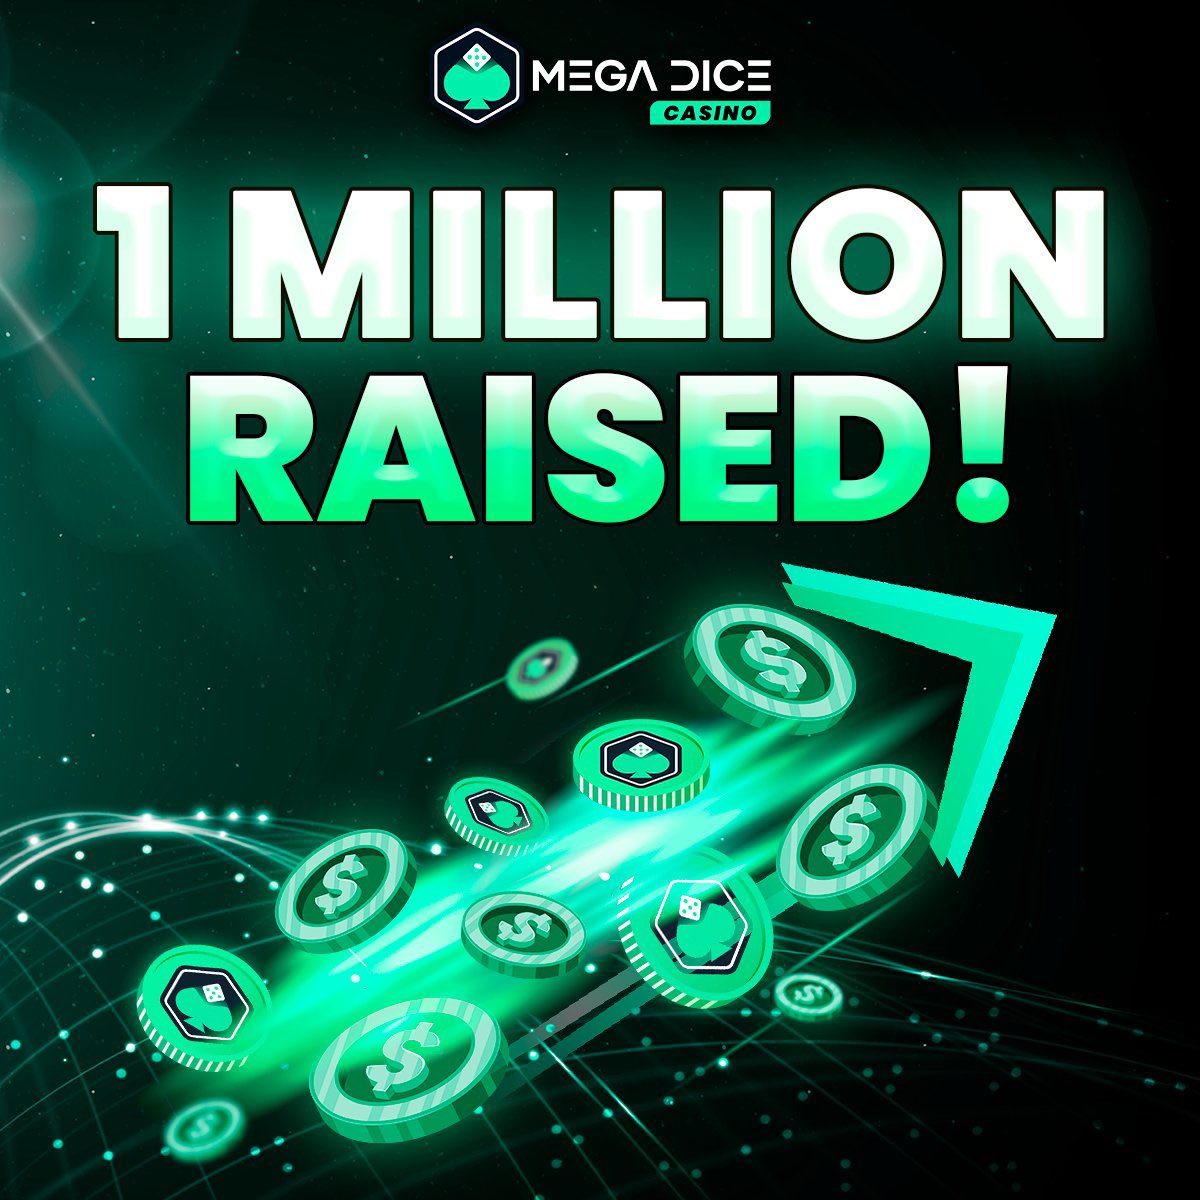 $DICE has raised $1M in presale so far - currently at $1.2M - it is a tiered presale, so price will increase when $2M is hit!🚀 Buy $DICE here: megadicetoken.com 🚀🏆 PLAY NOW: t.me/megadicecasino… OR megadice.com What's coming next? 👇 - Staking